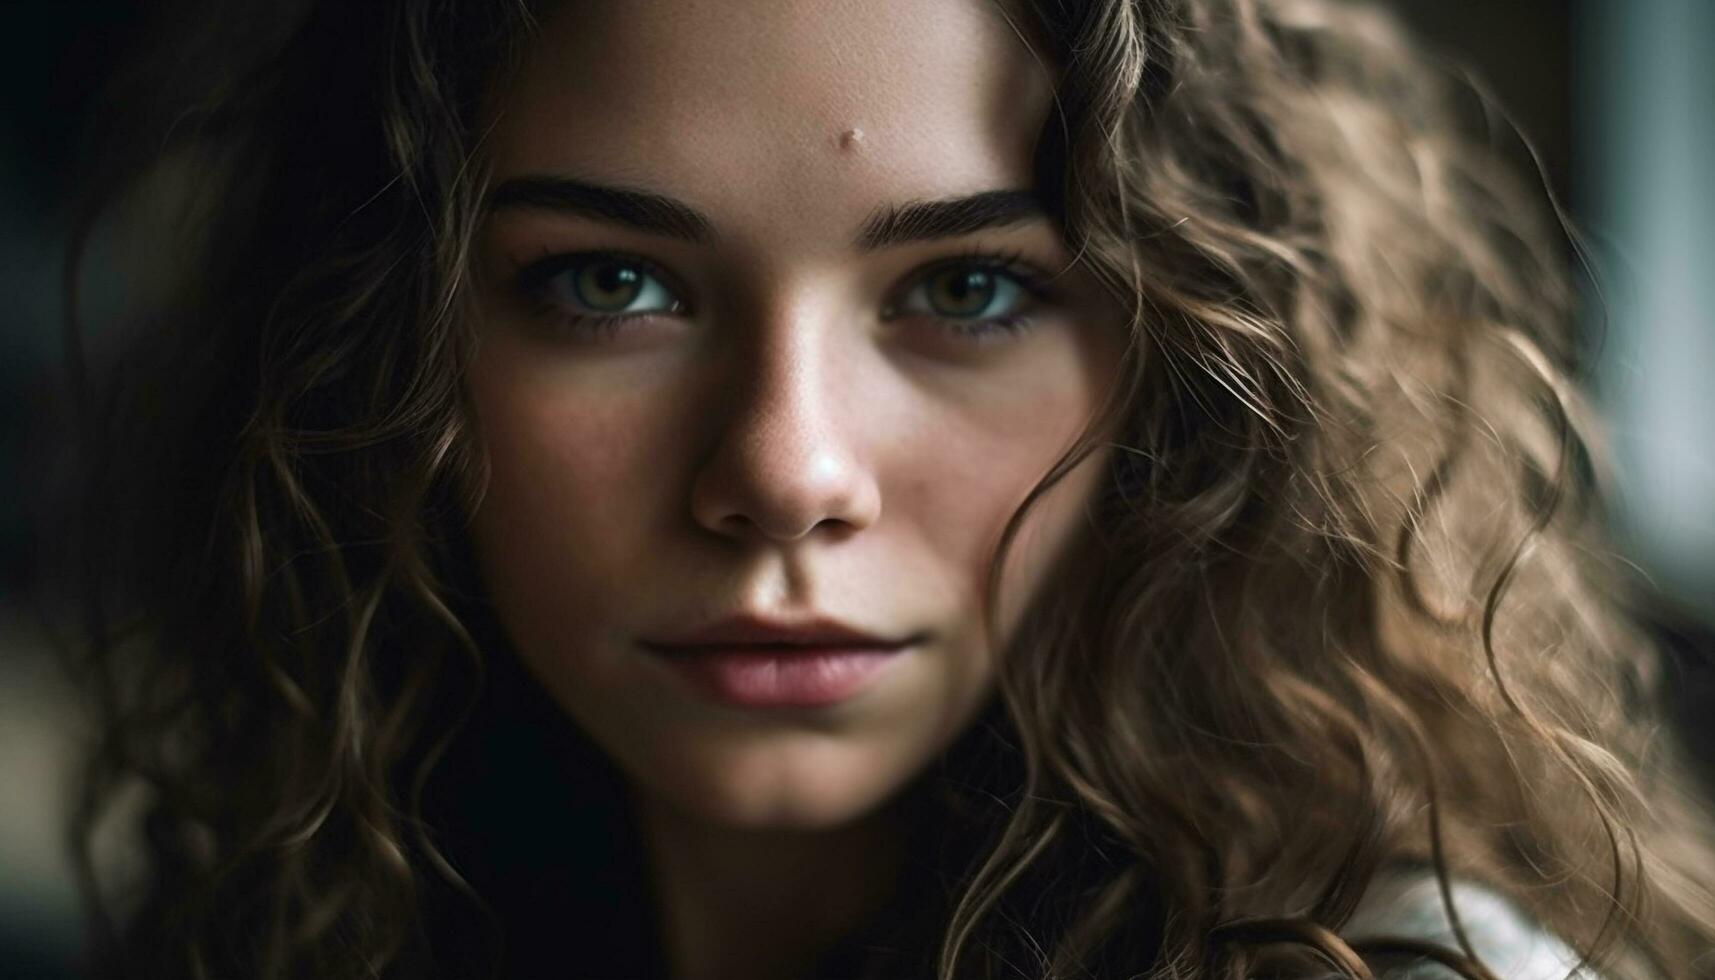 A beautiful young woman with brown hair looking at camera generated by AI photo